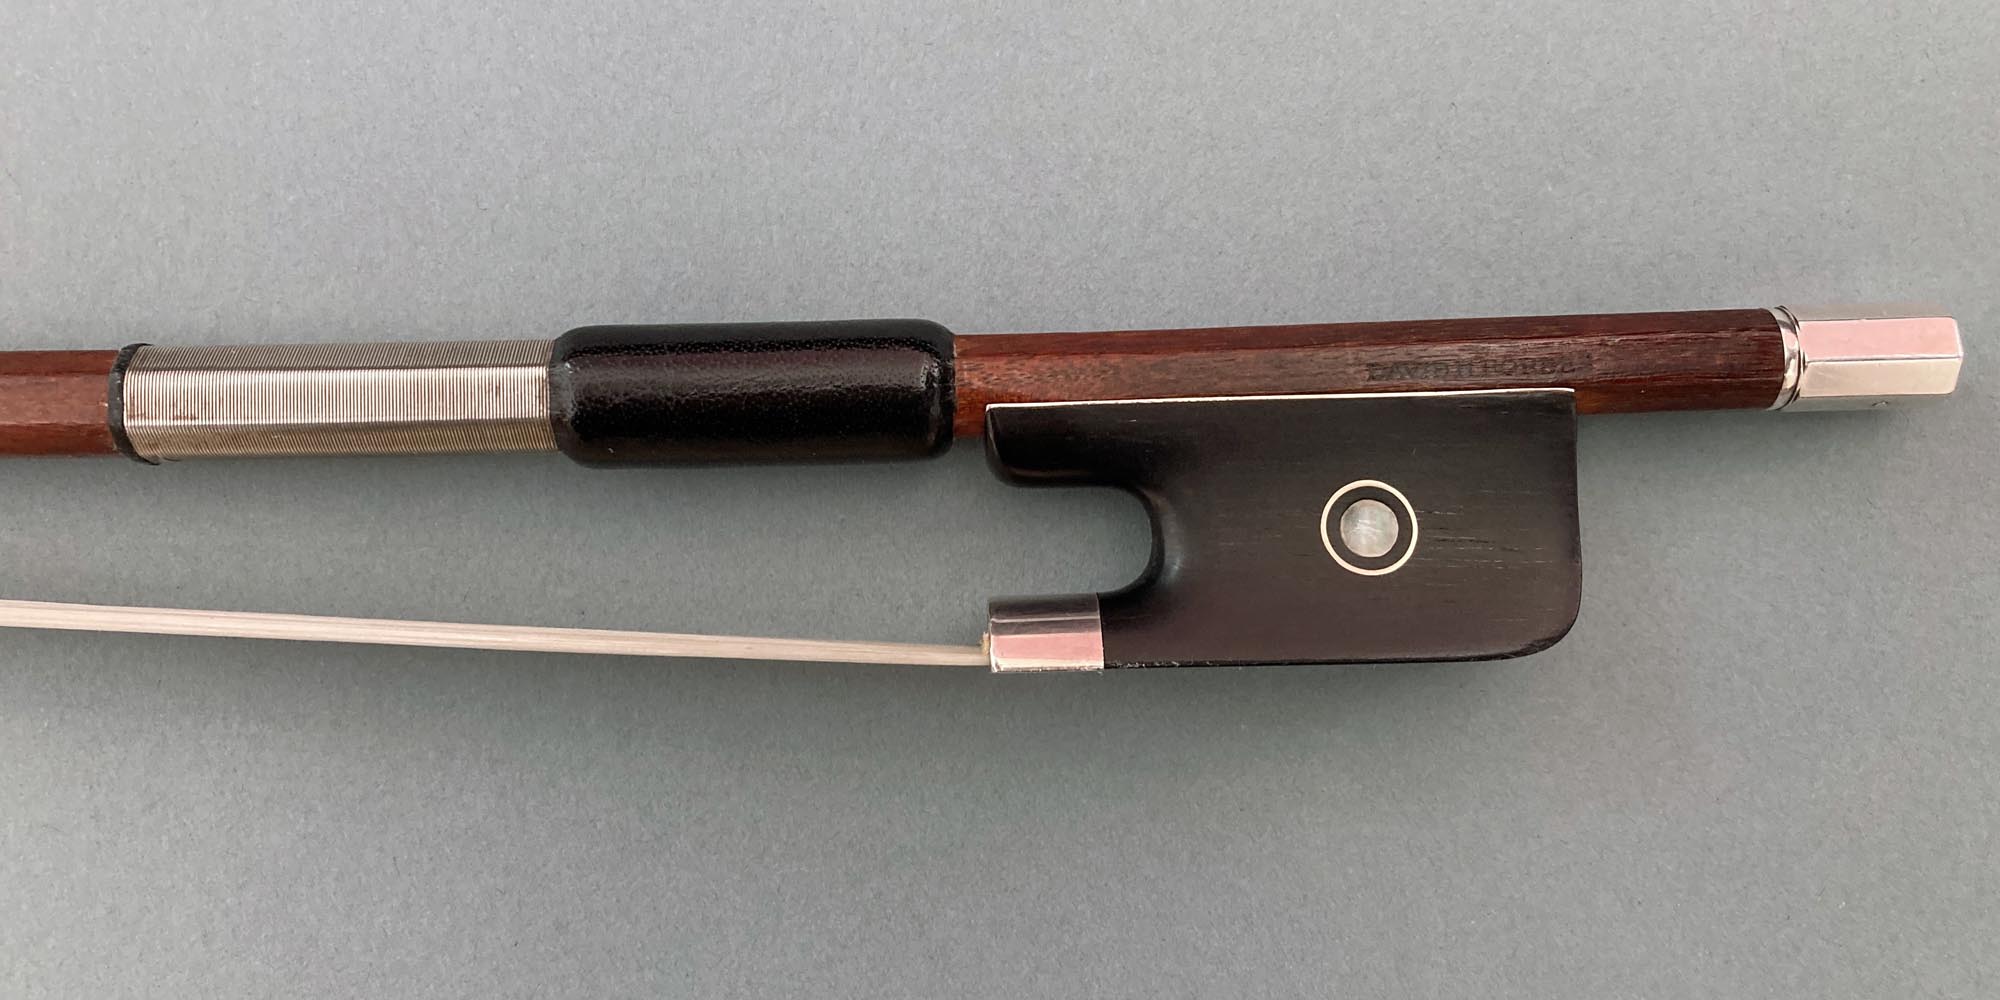 David H. Forbes Cello Bow - on Consignment